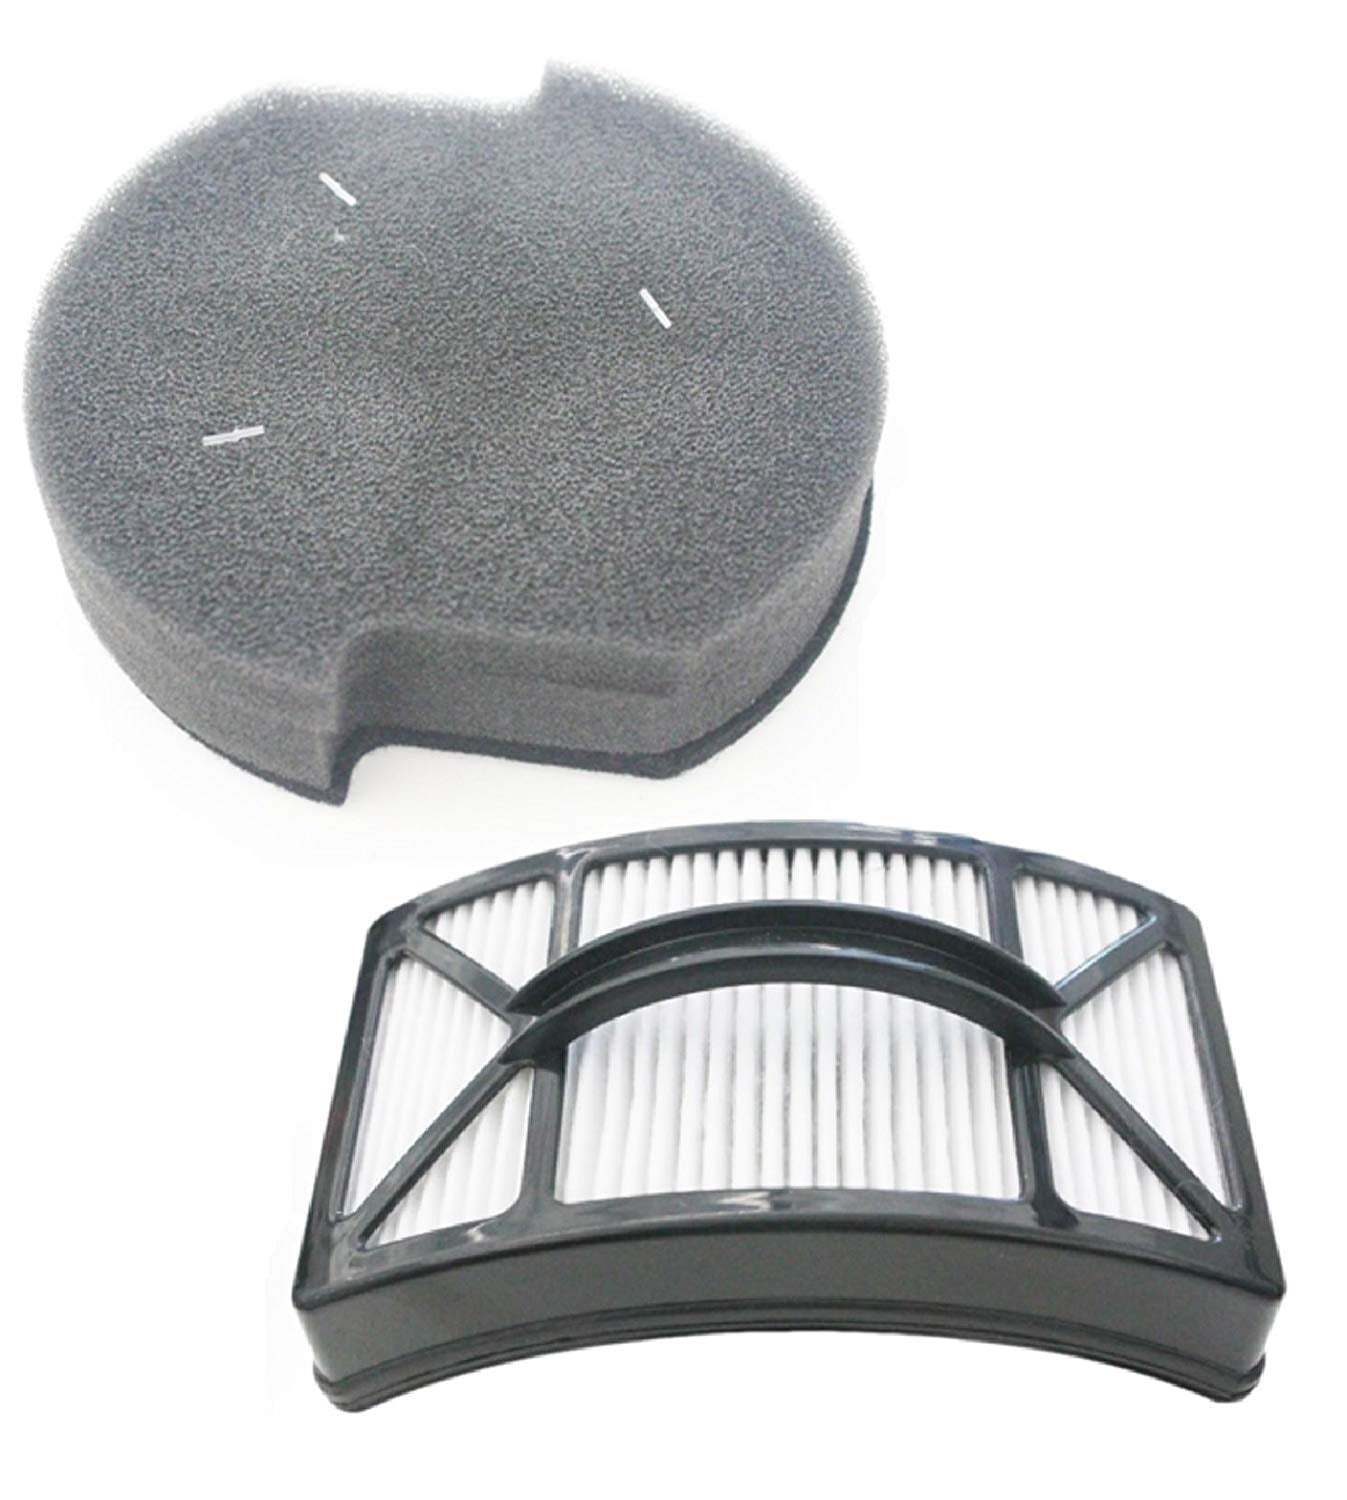 Green Label 2 Pack HEPA Filter for Bissell Powerlifter Pet Vacuum Cleaners compares to 1604130